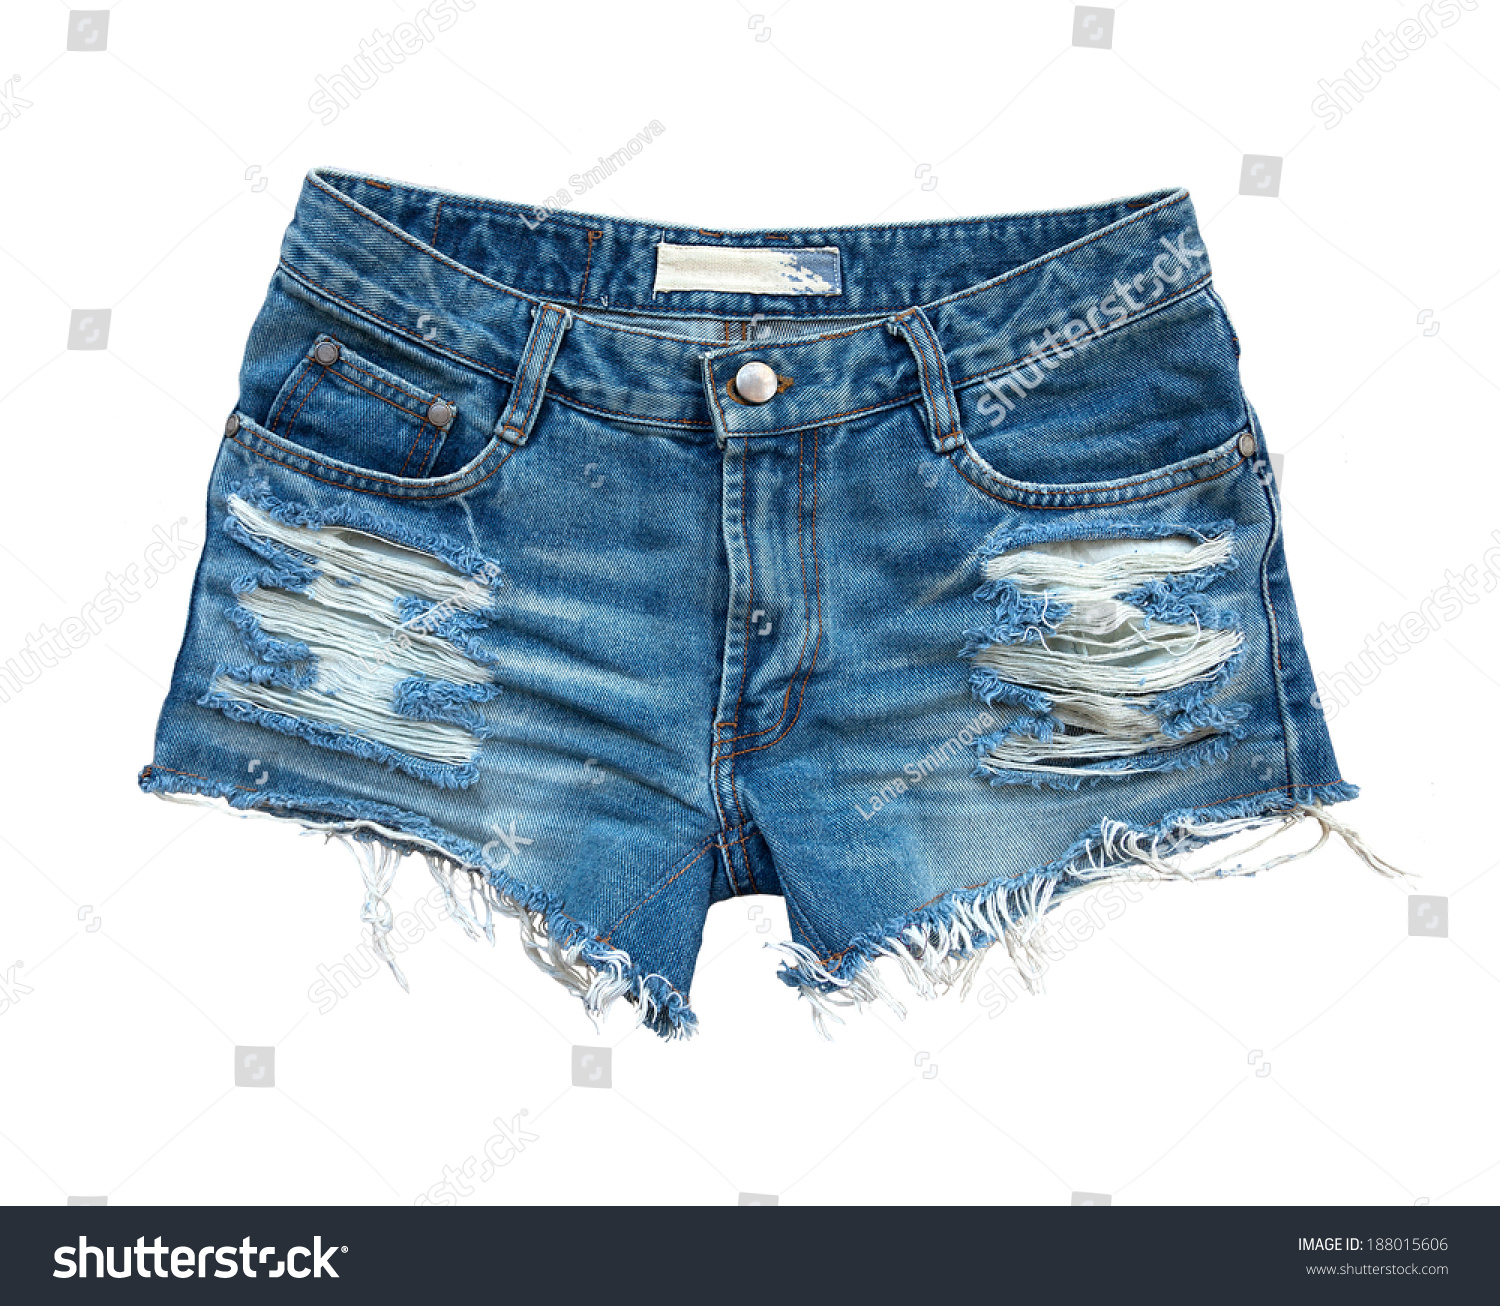 Ripped Handmade Jeans Shorts Isolated On White Background. Stock Photo ...